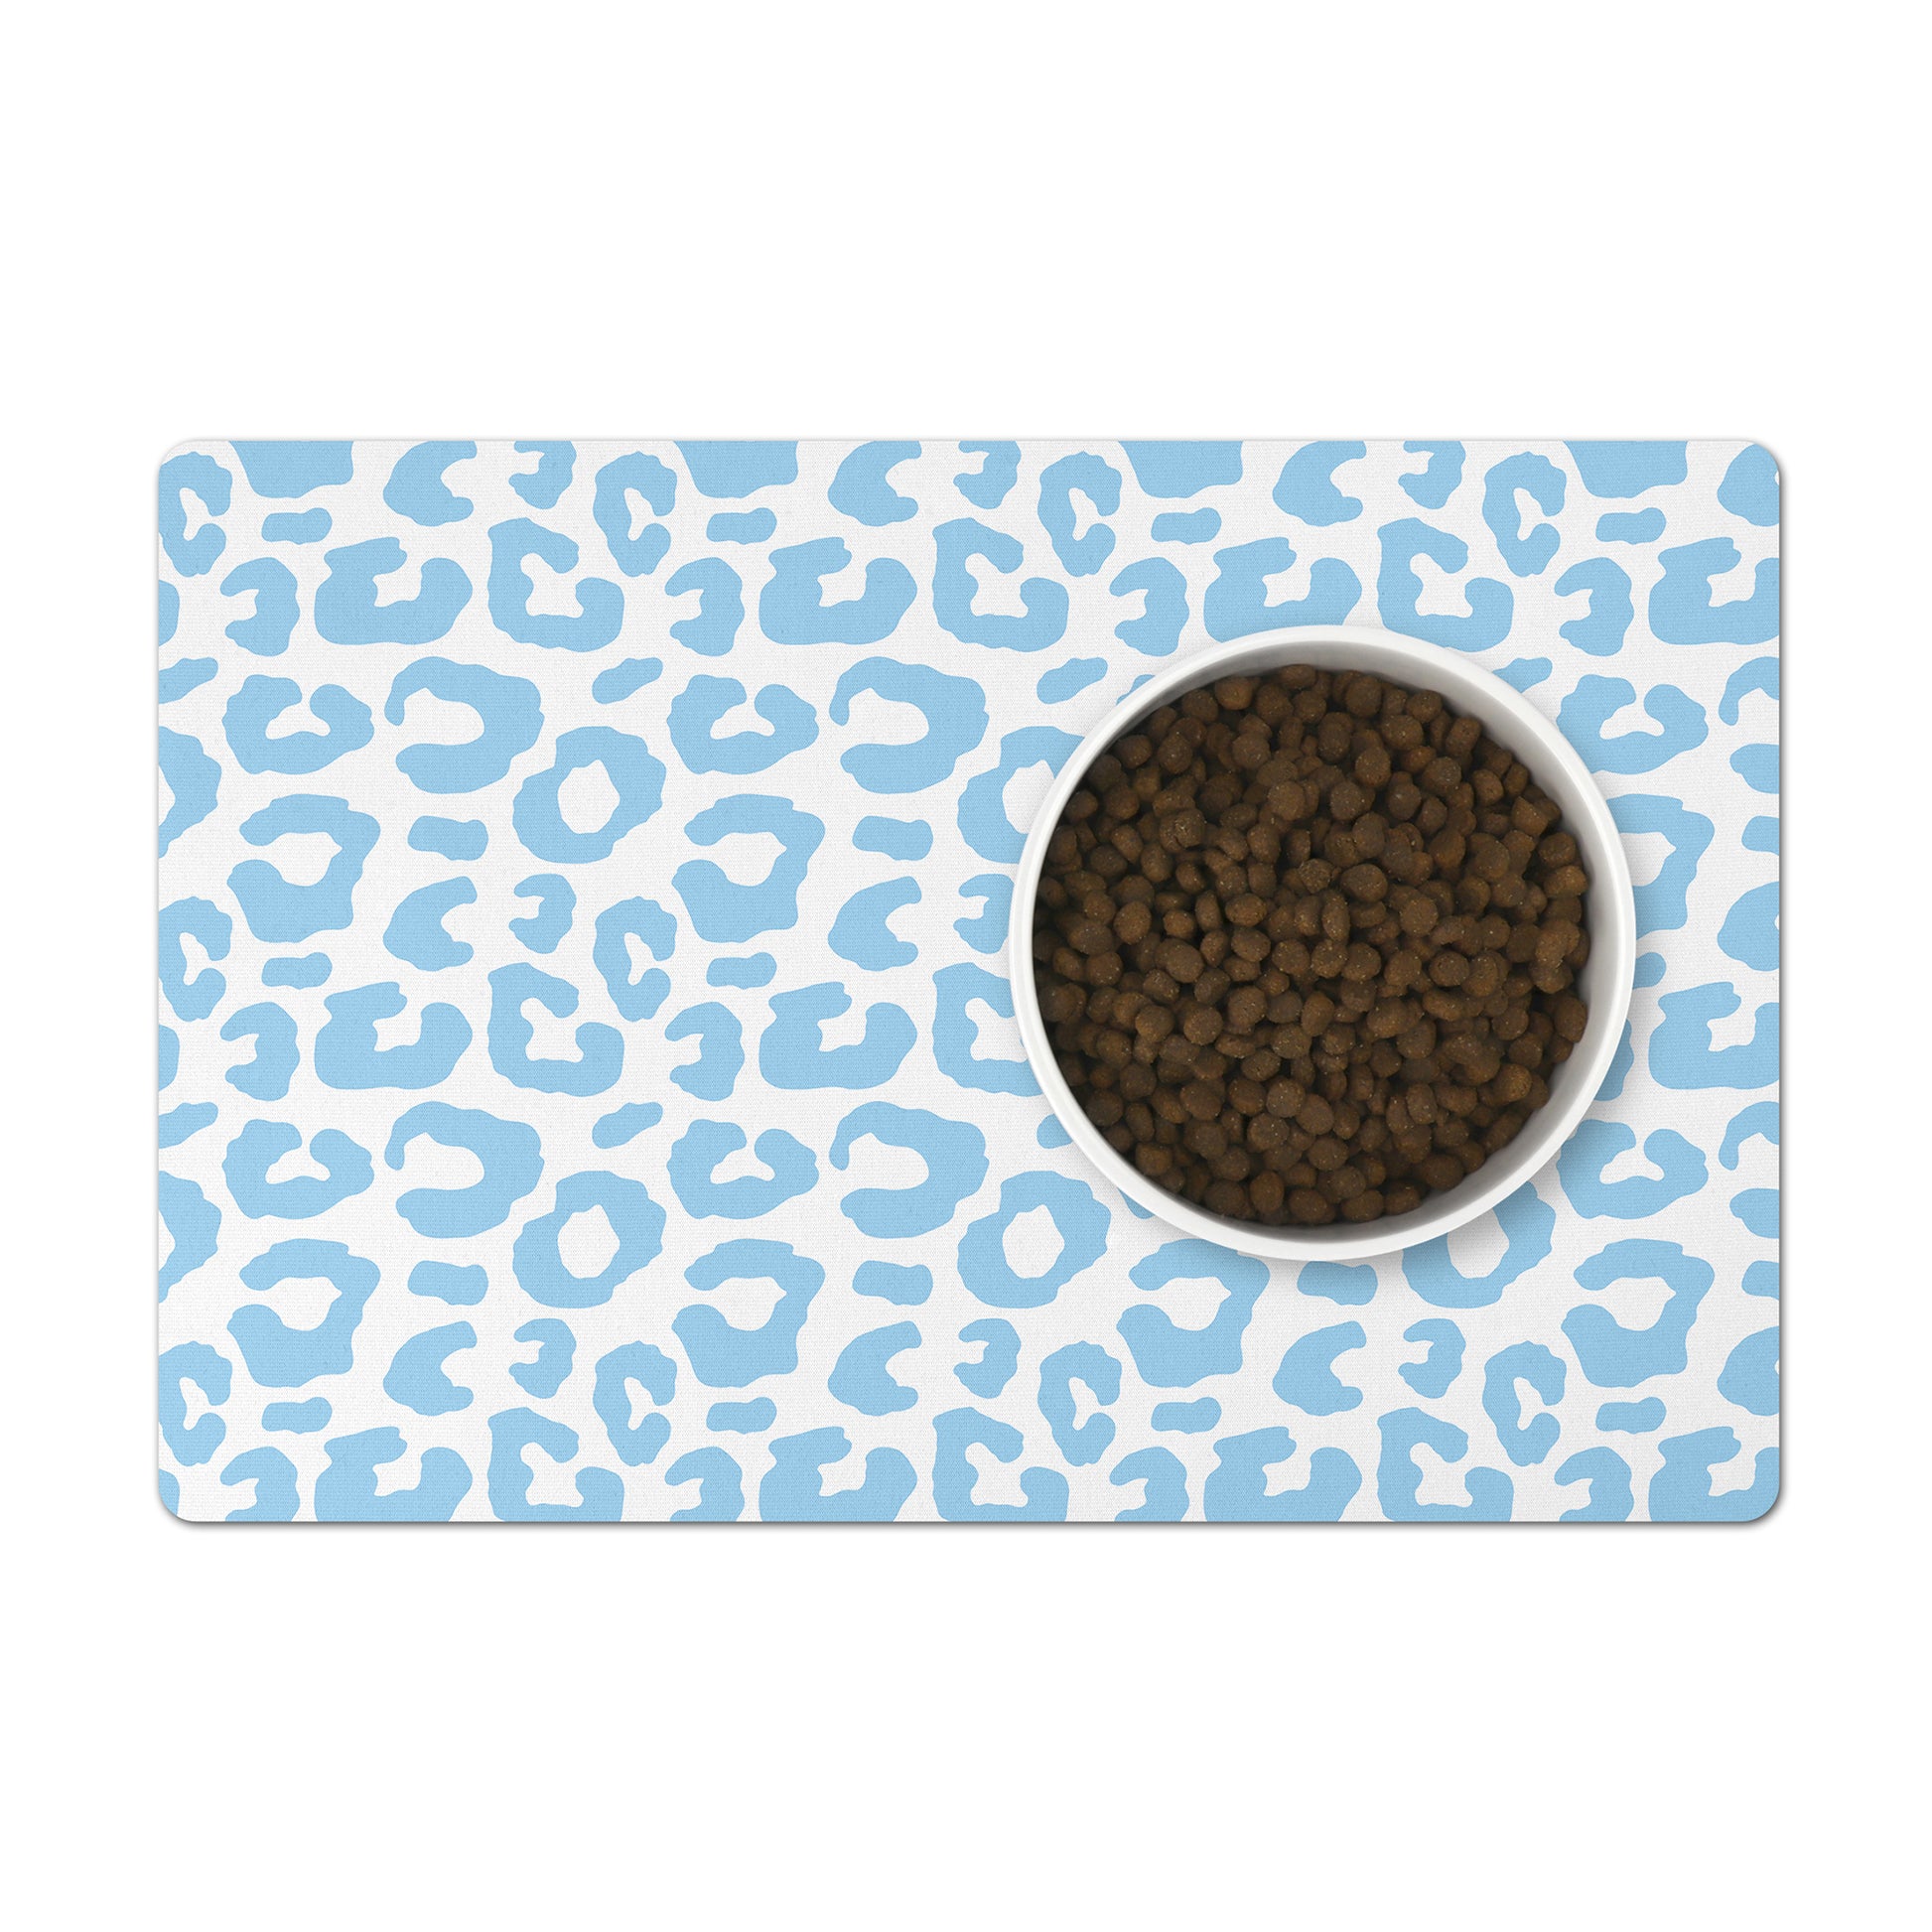 Blue and white leopard pet feeding mat.